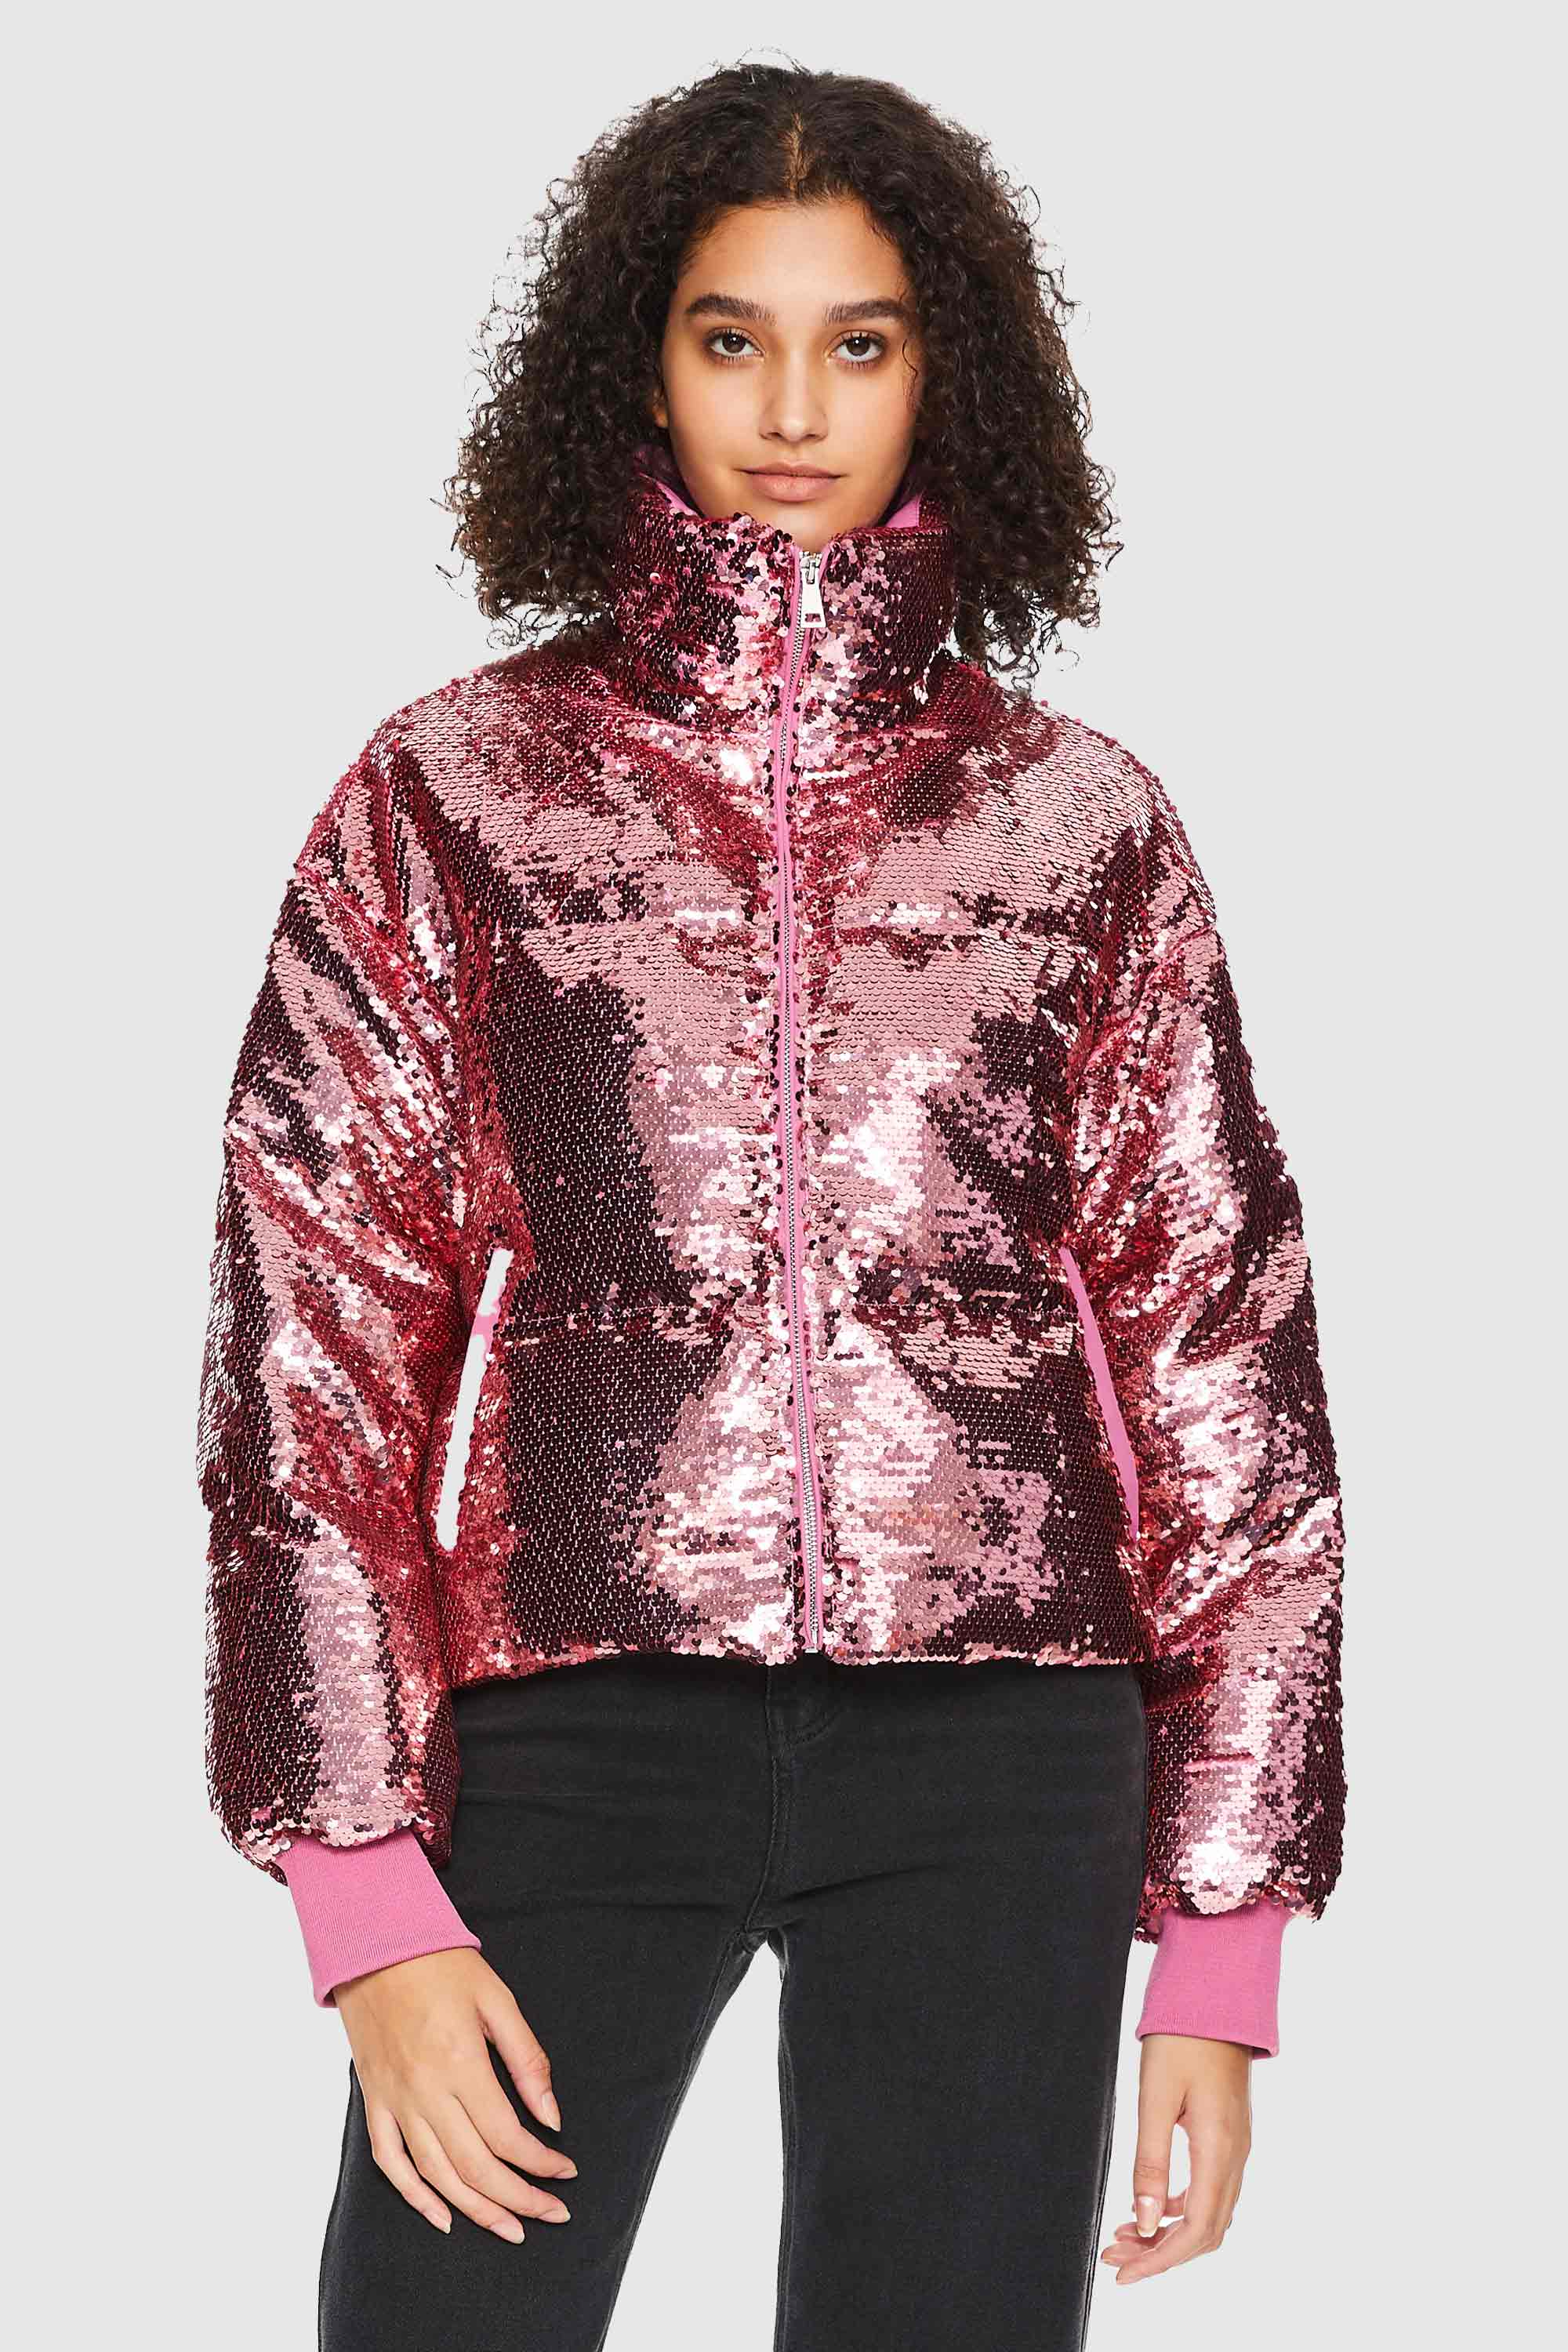 Buy IN'VOLAND Womens Sequin Jacket Plus Size Sparkle Long Sleeve Jackets  Front Zip Loose Casual Blazer Bomber Jacket with Pocket Wine Red at  Amazon.in